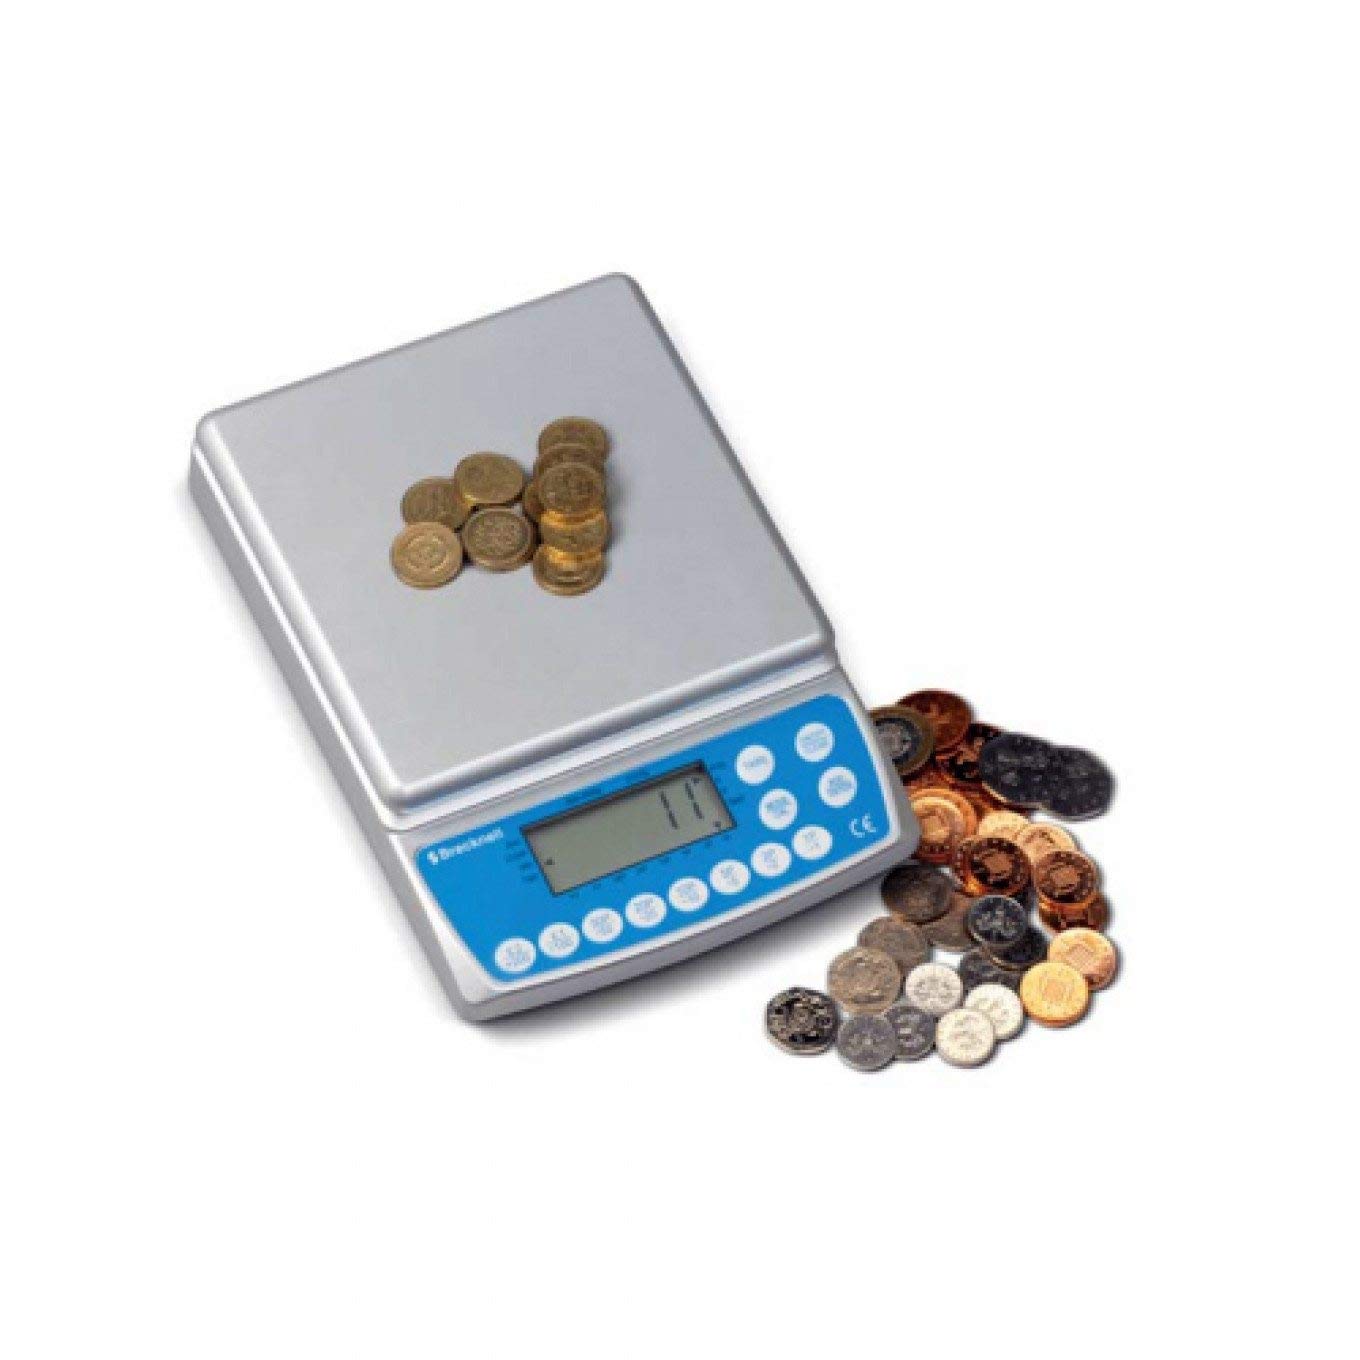 A scale weighing pennies.